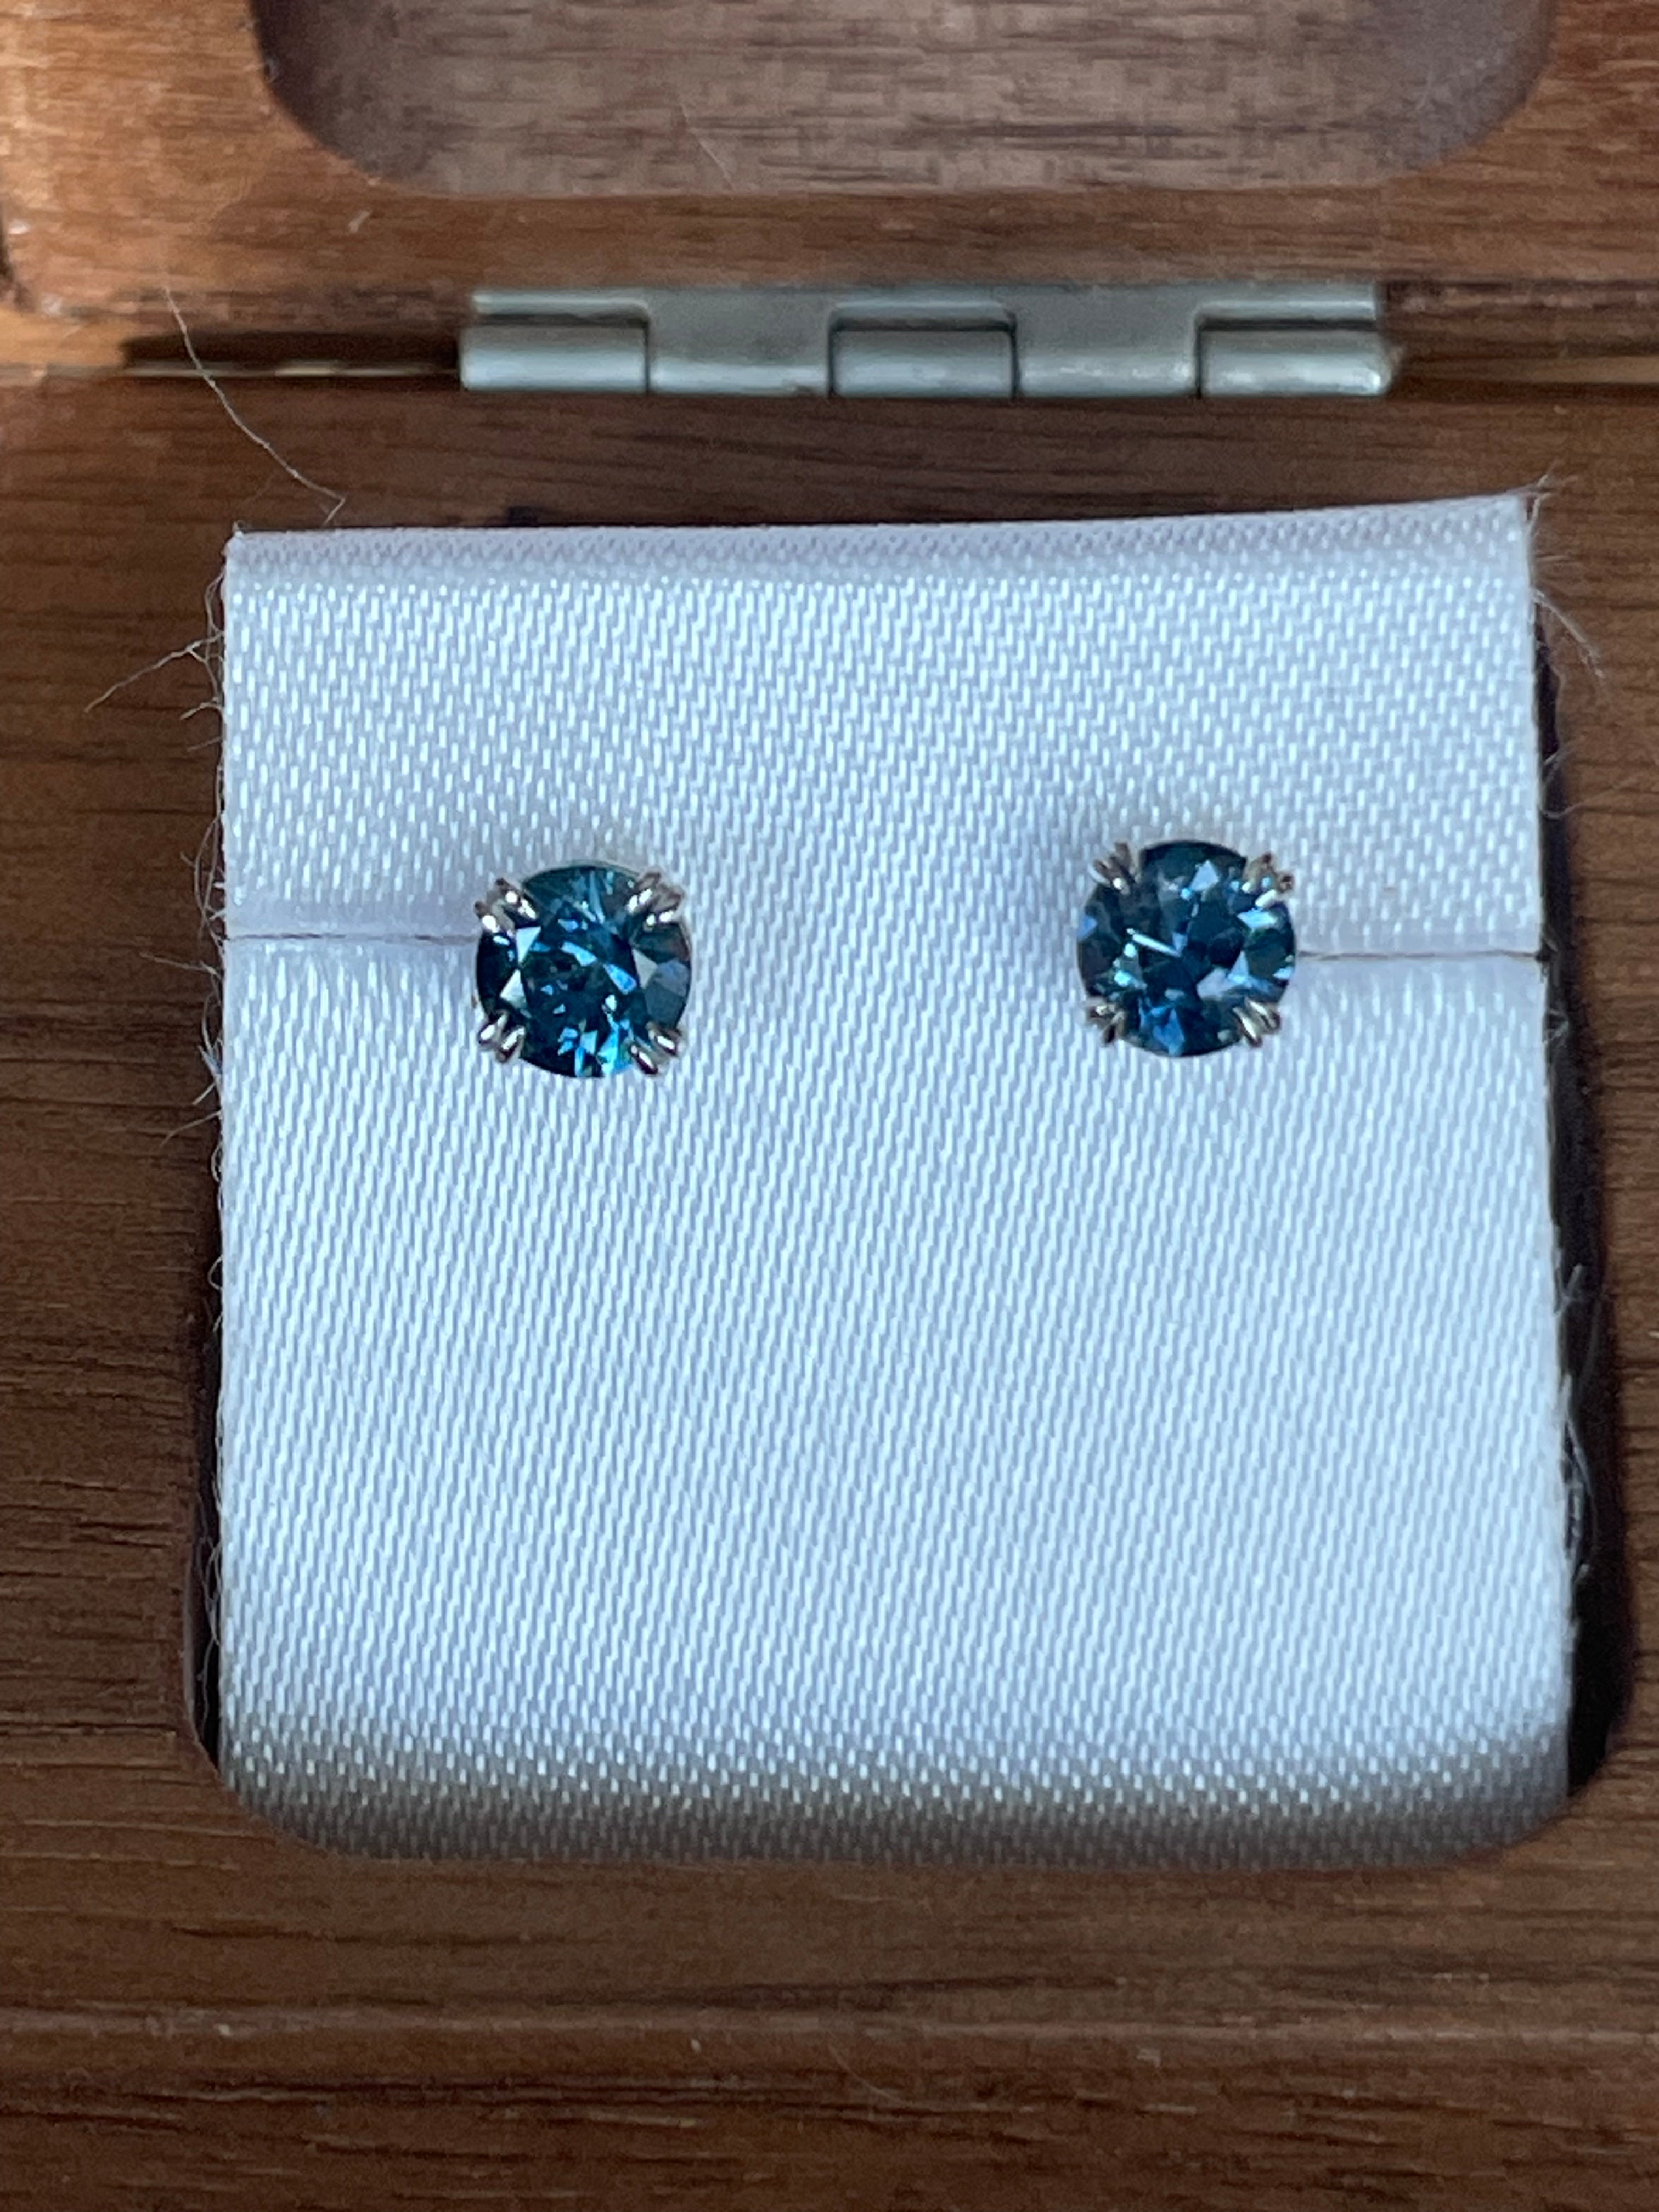 Montana Sapphire Blue Round Double Claw Prong Stud Earrings .88 ctw 14k White Gold